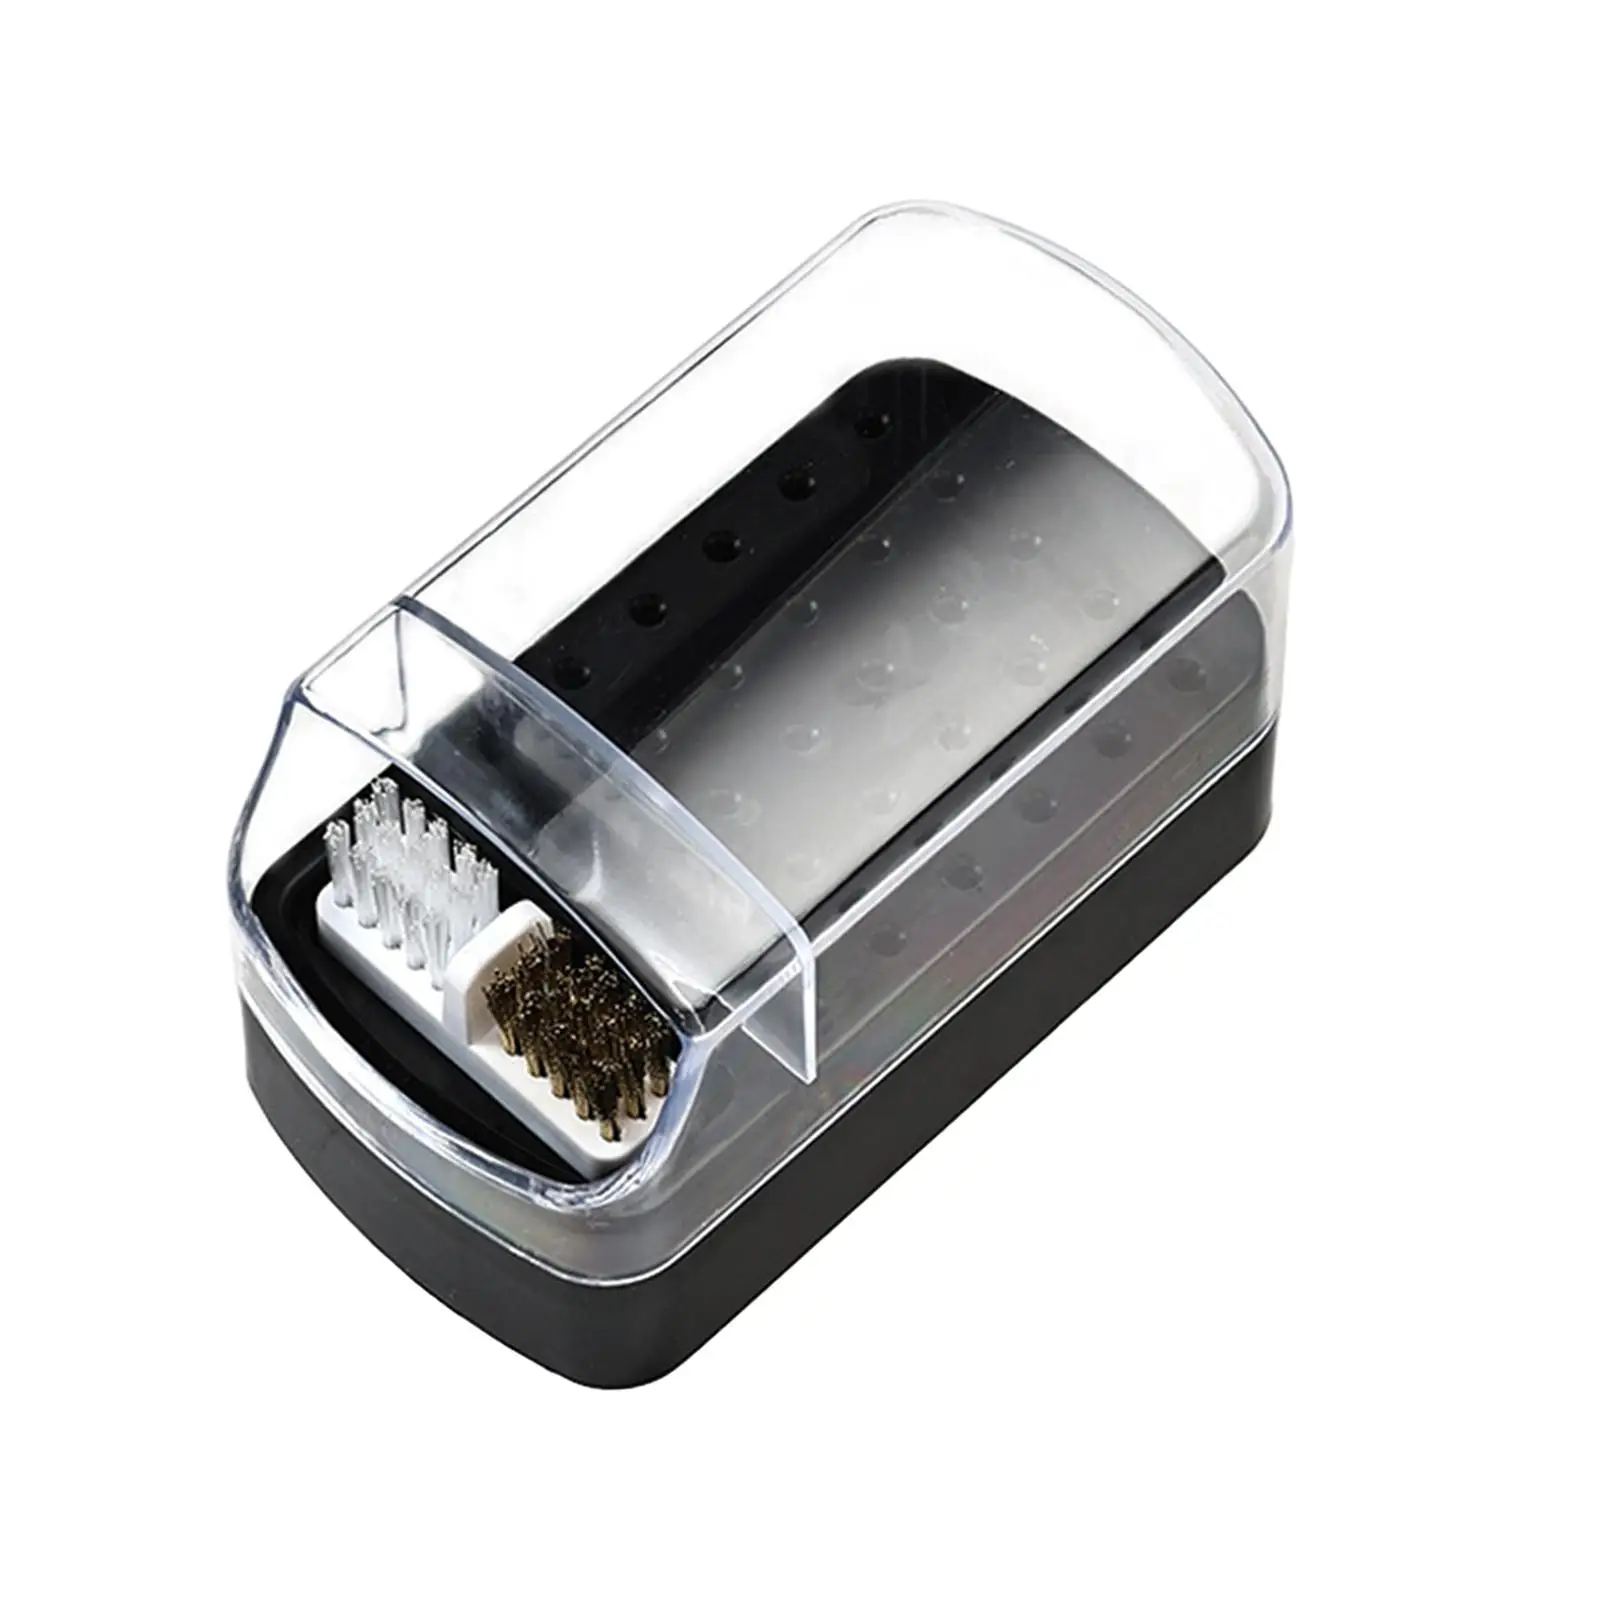 Nail Drill Bit Holder 30 Slots Container Portable Durable with Clear Lid Dustproof Salon Nail Bit Organizer Nail Drill Bit Case